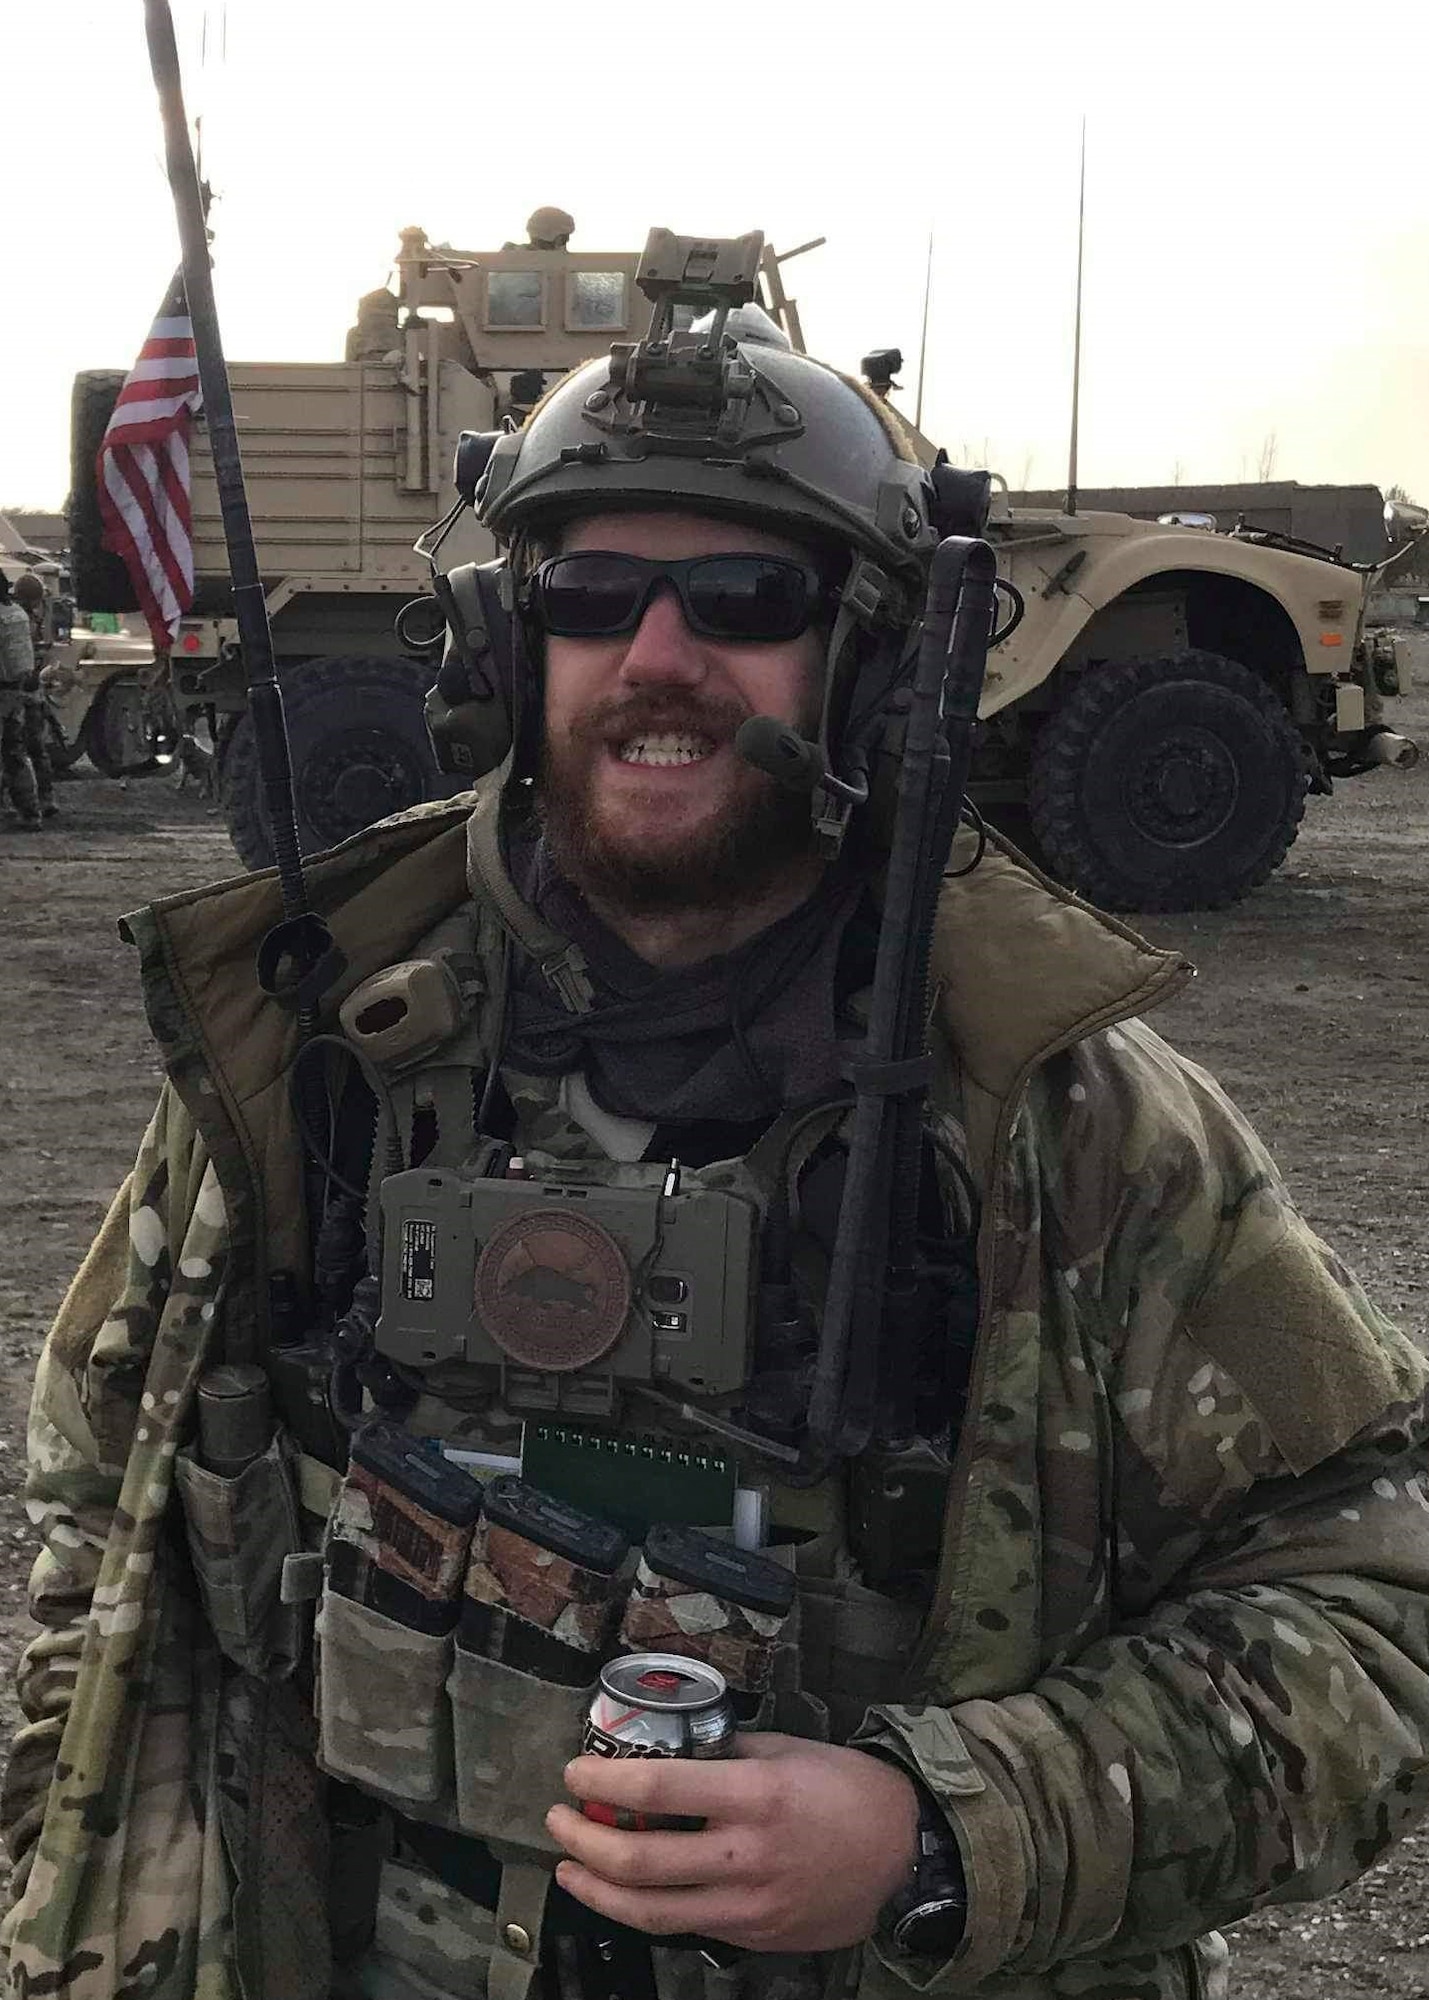 U.S. Air Force Staff Sgt. Dylan Elchin, a Special Tactics combat controller with the 26th Special Tactics Squadron, was killed when his vehicle hit an improvised explosive device in Ghazni Province, Afghanistan, Nov. 27, 2018.